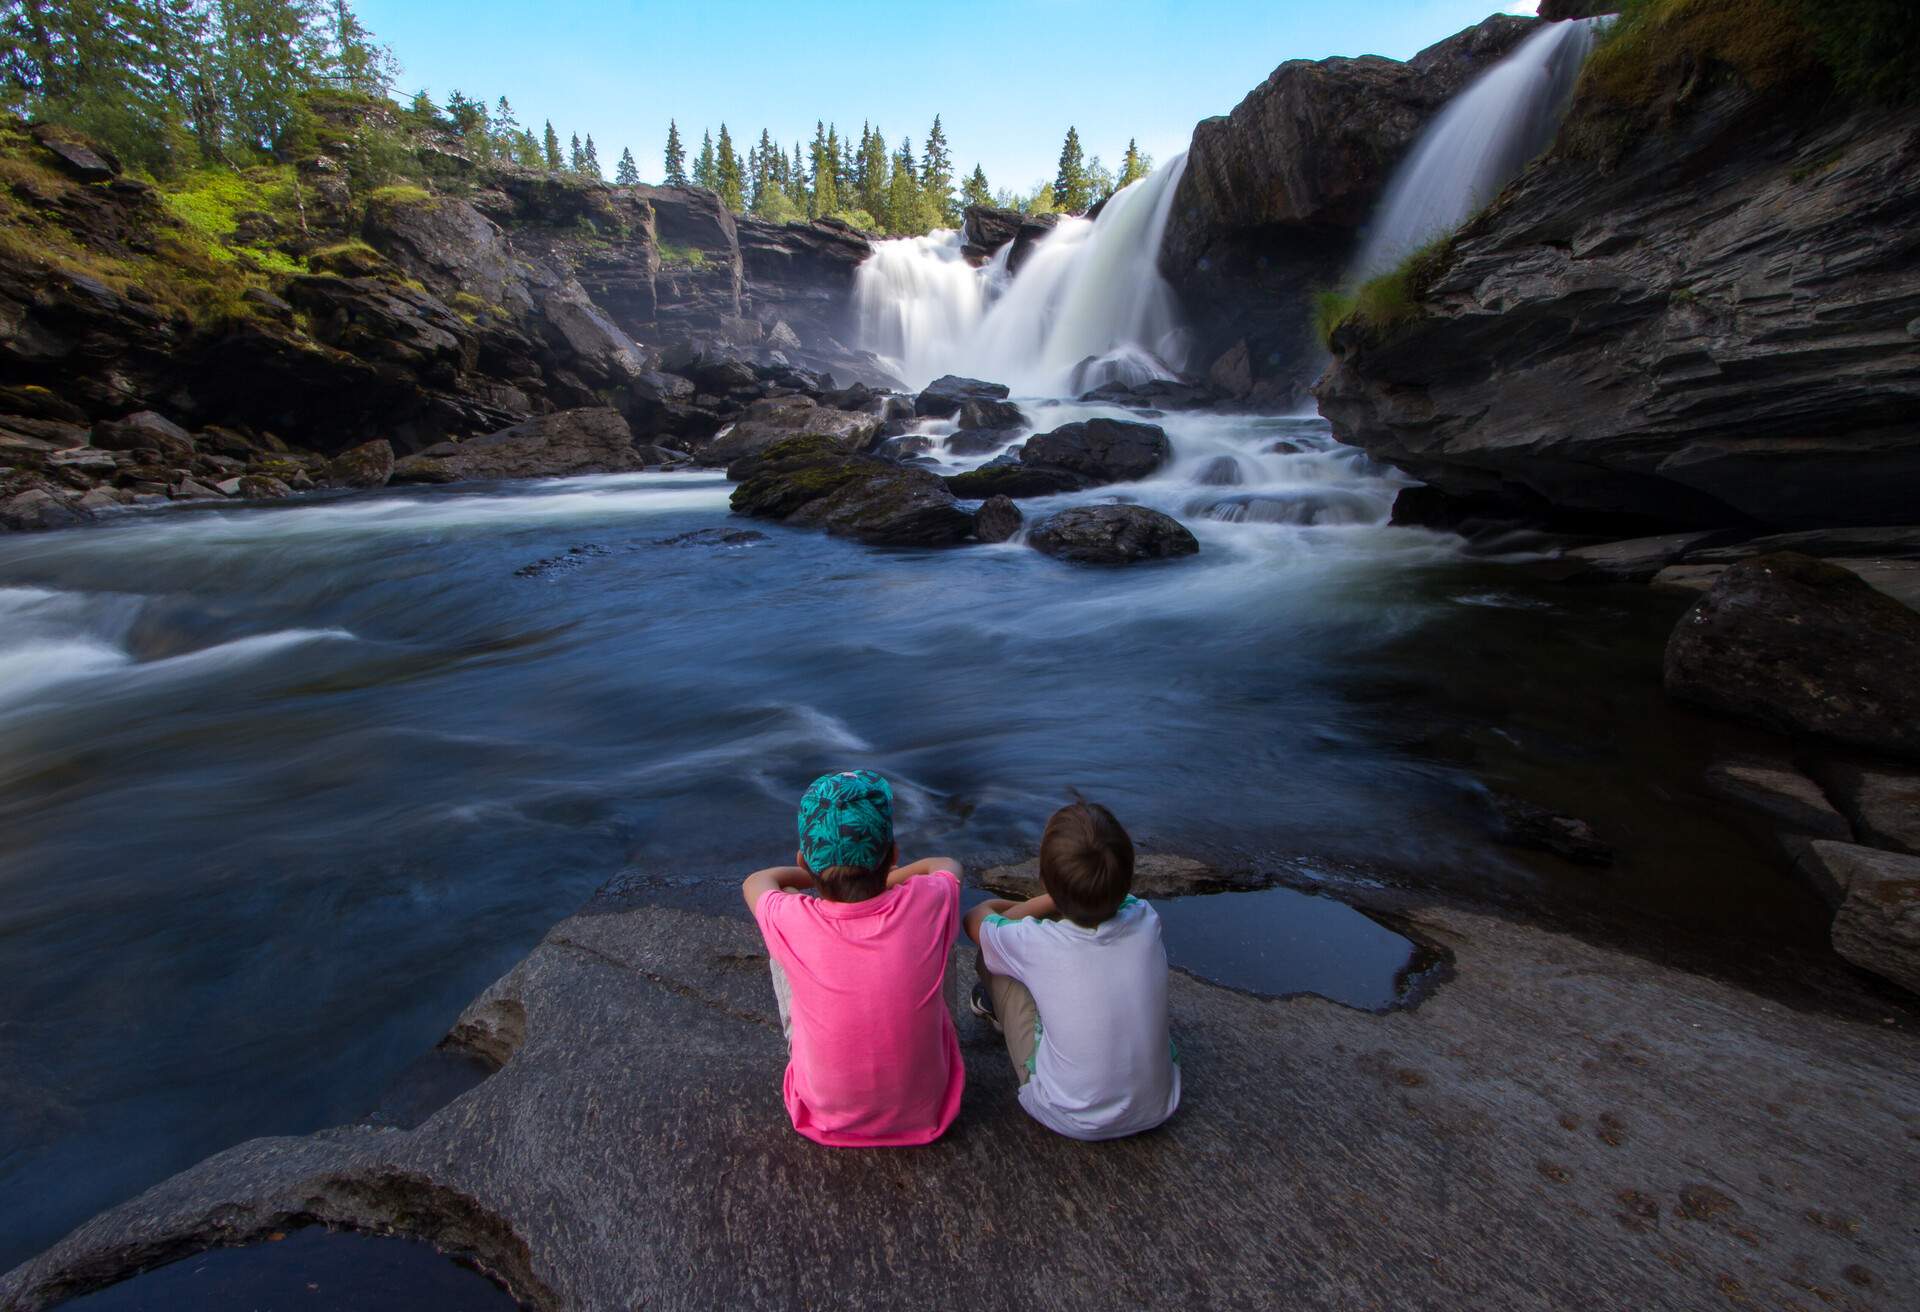 Ristafallet in Jämtland Sweden brings mindfulness to two boys sitting on a flat rock by the mesmerizing waterfalls